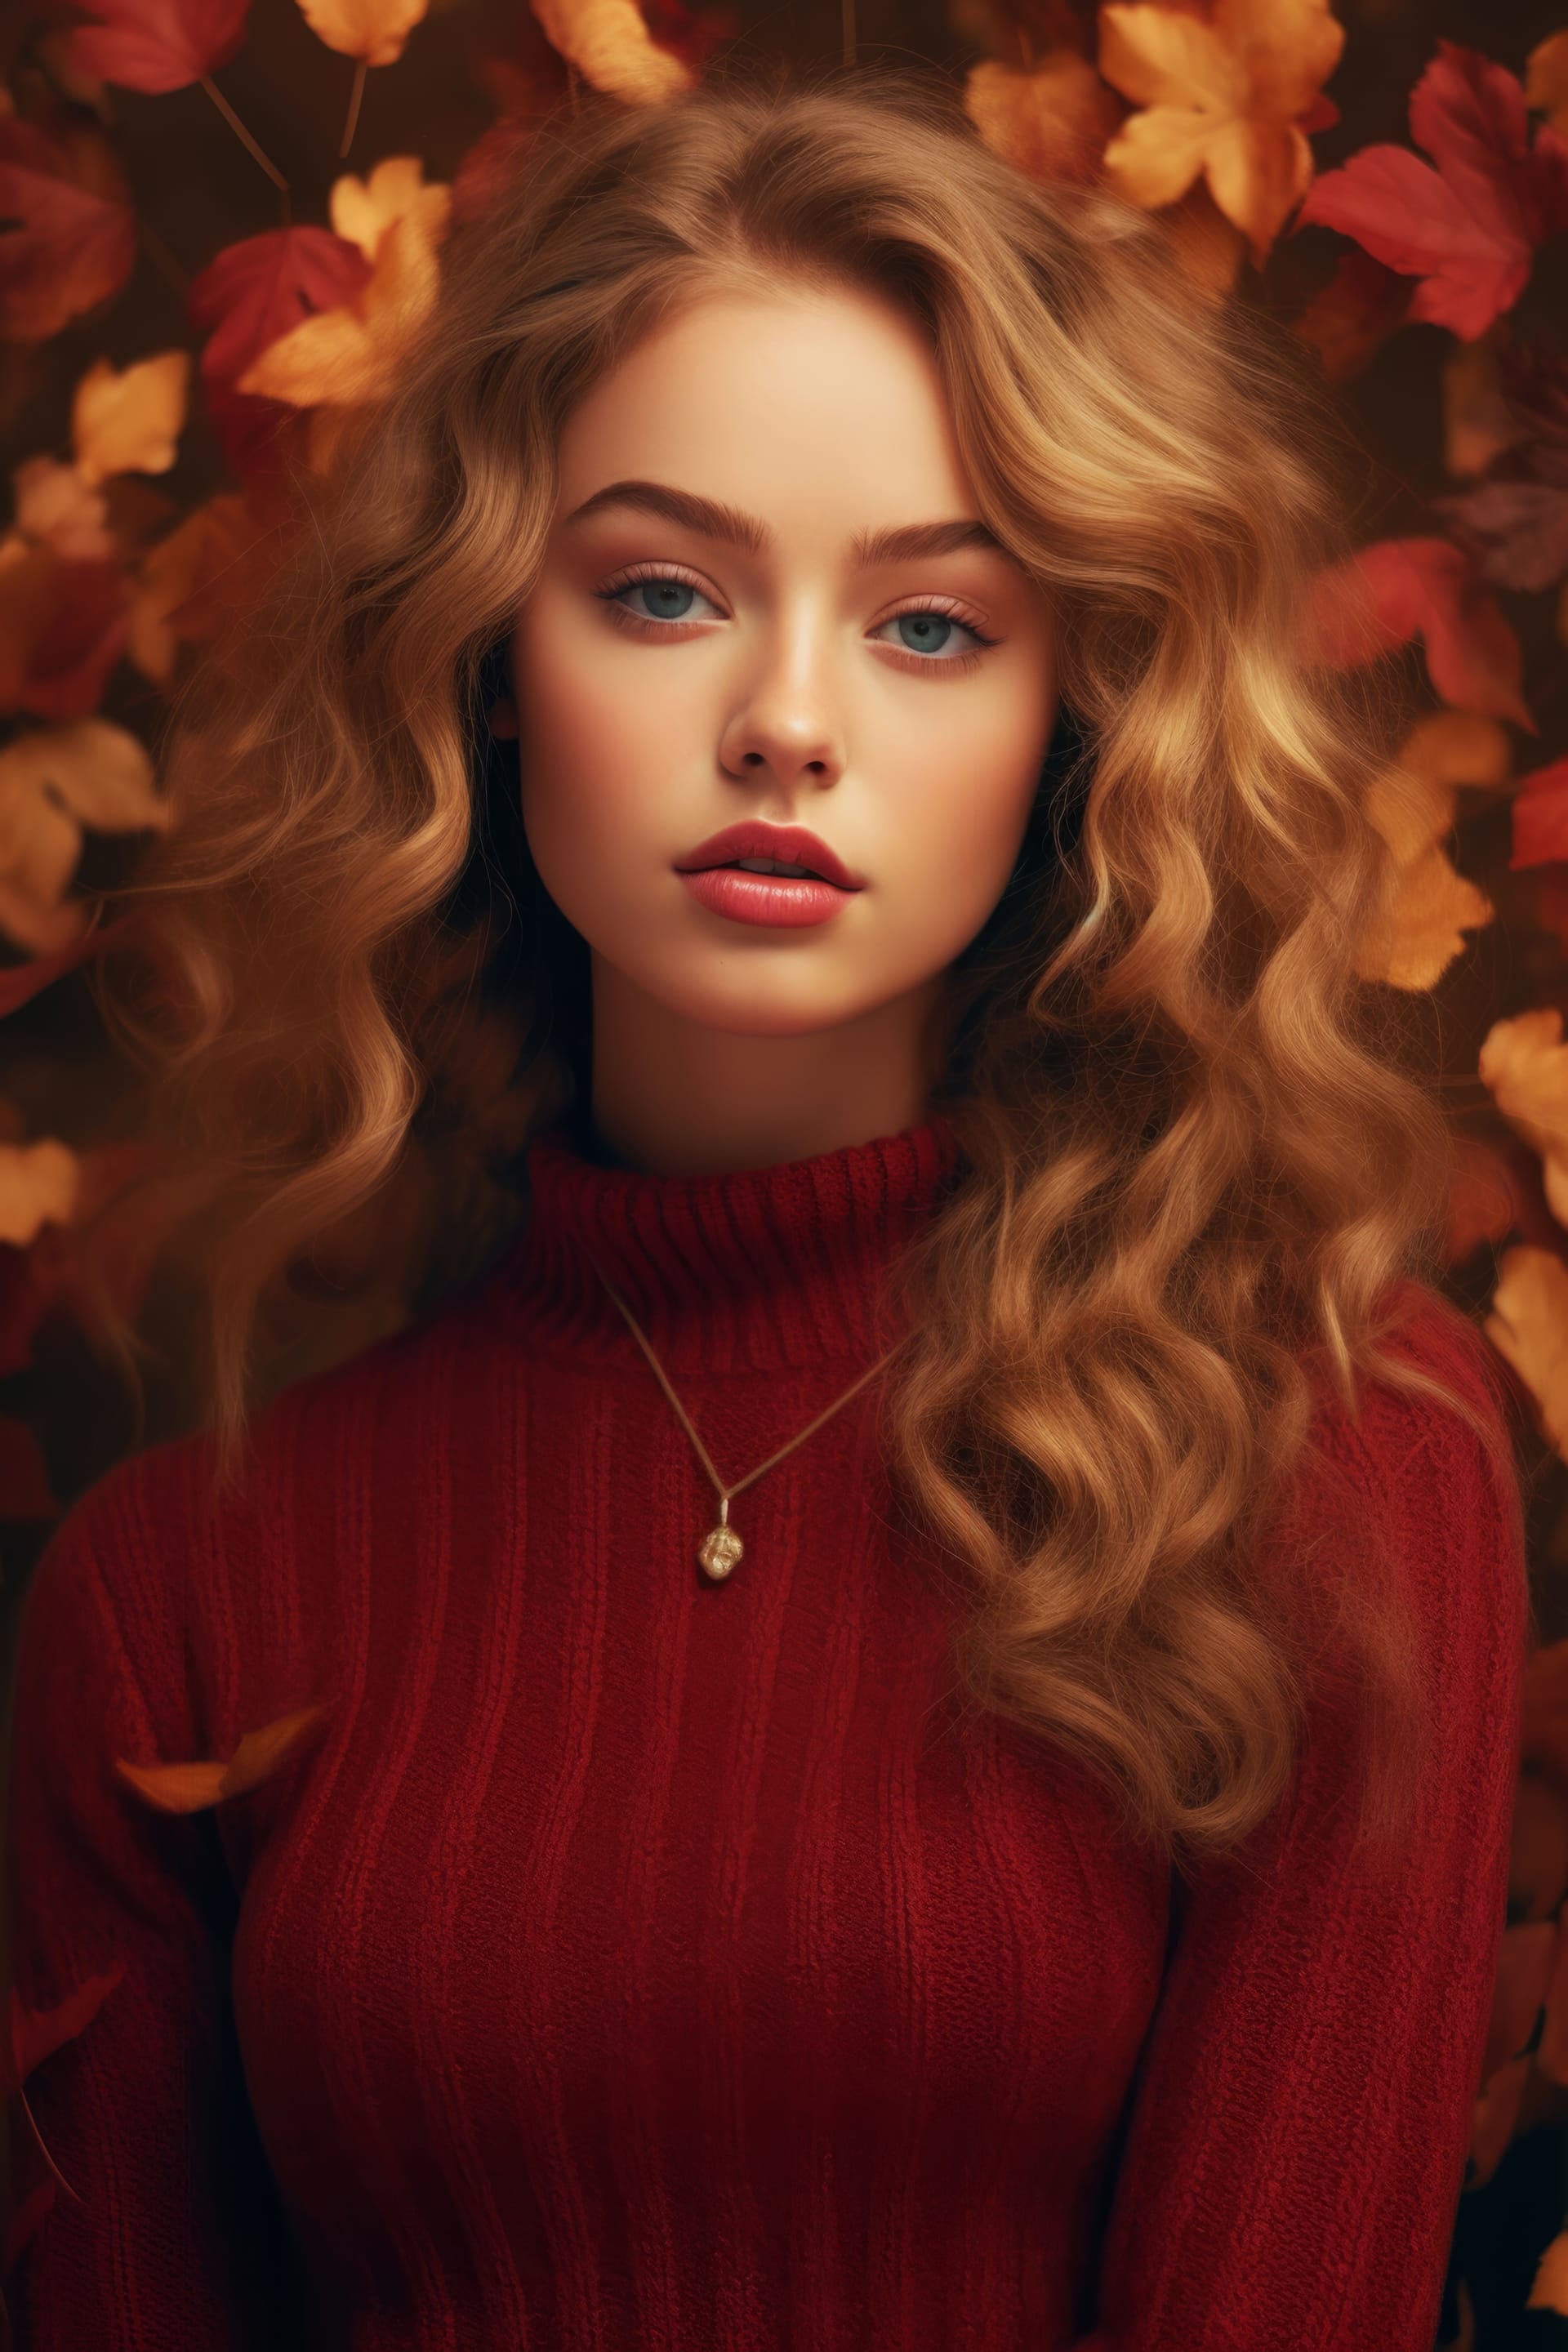 Girl with long curly hair red sweater